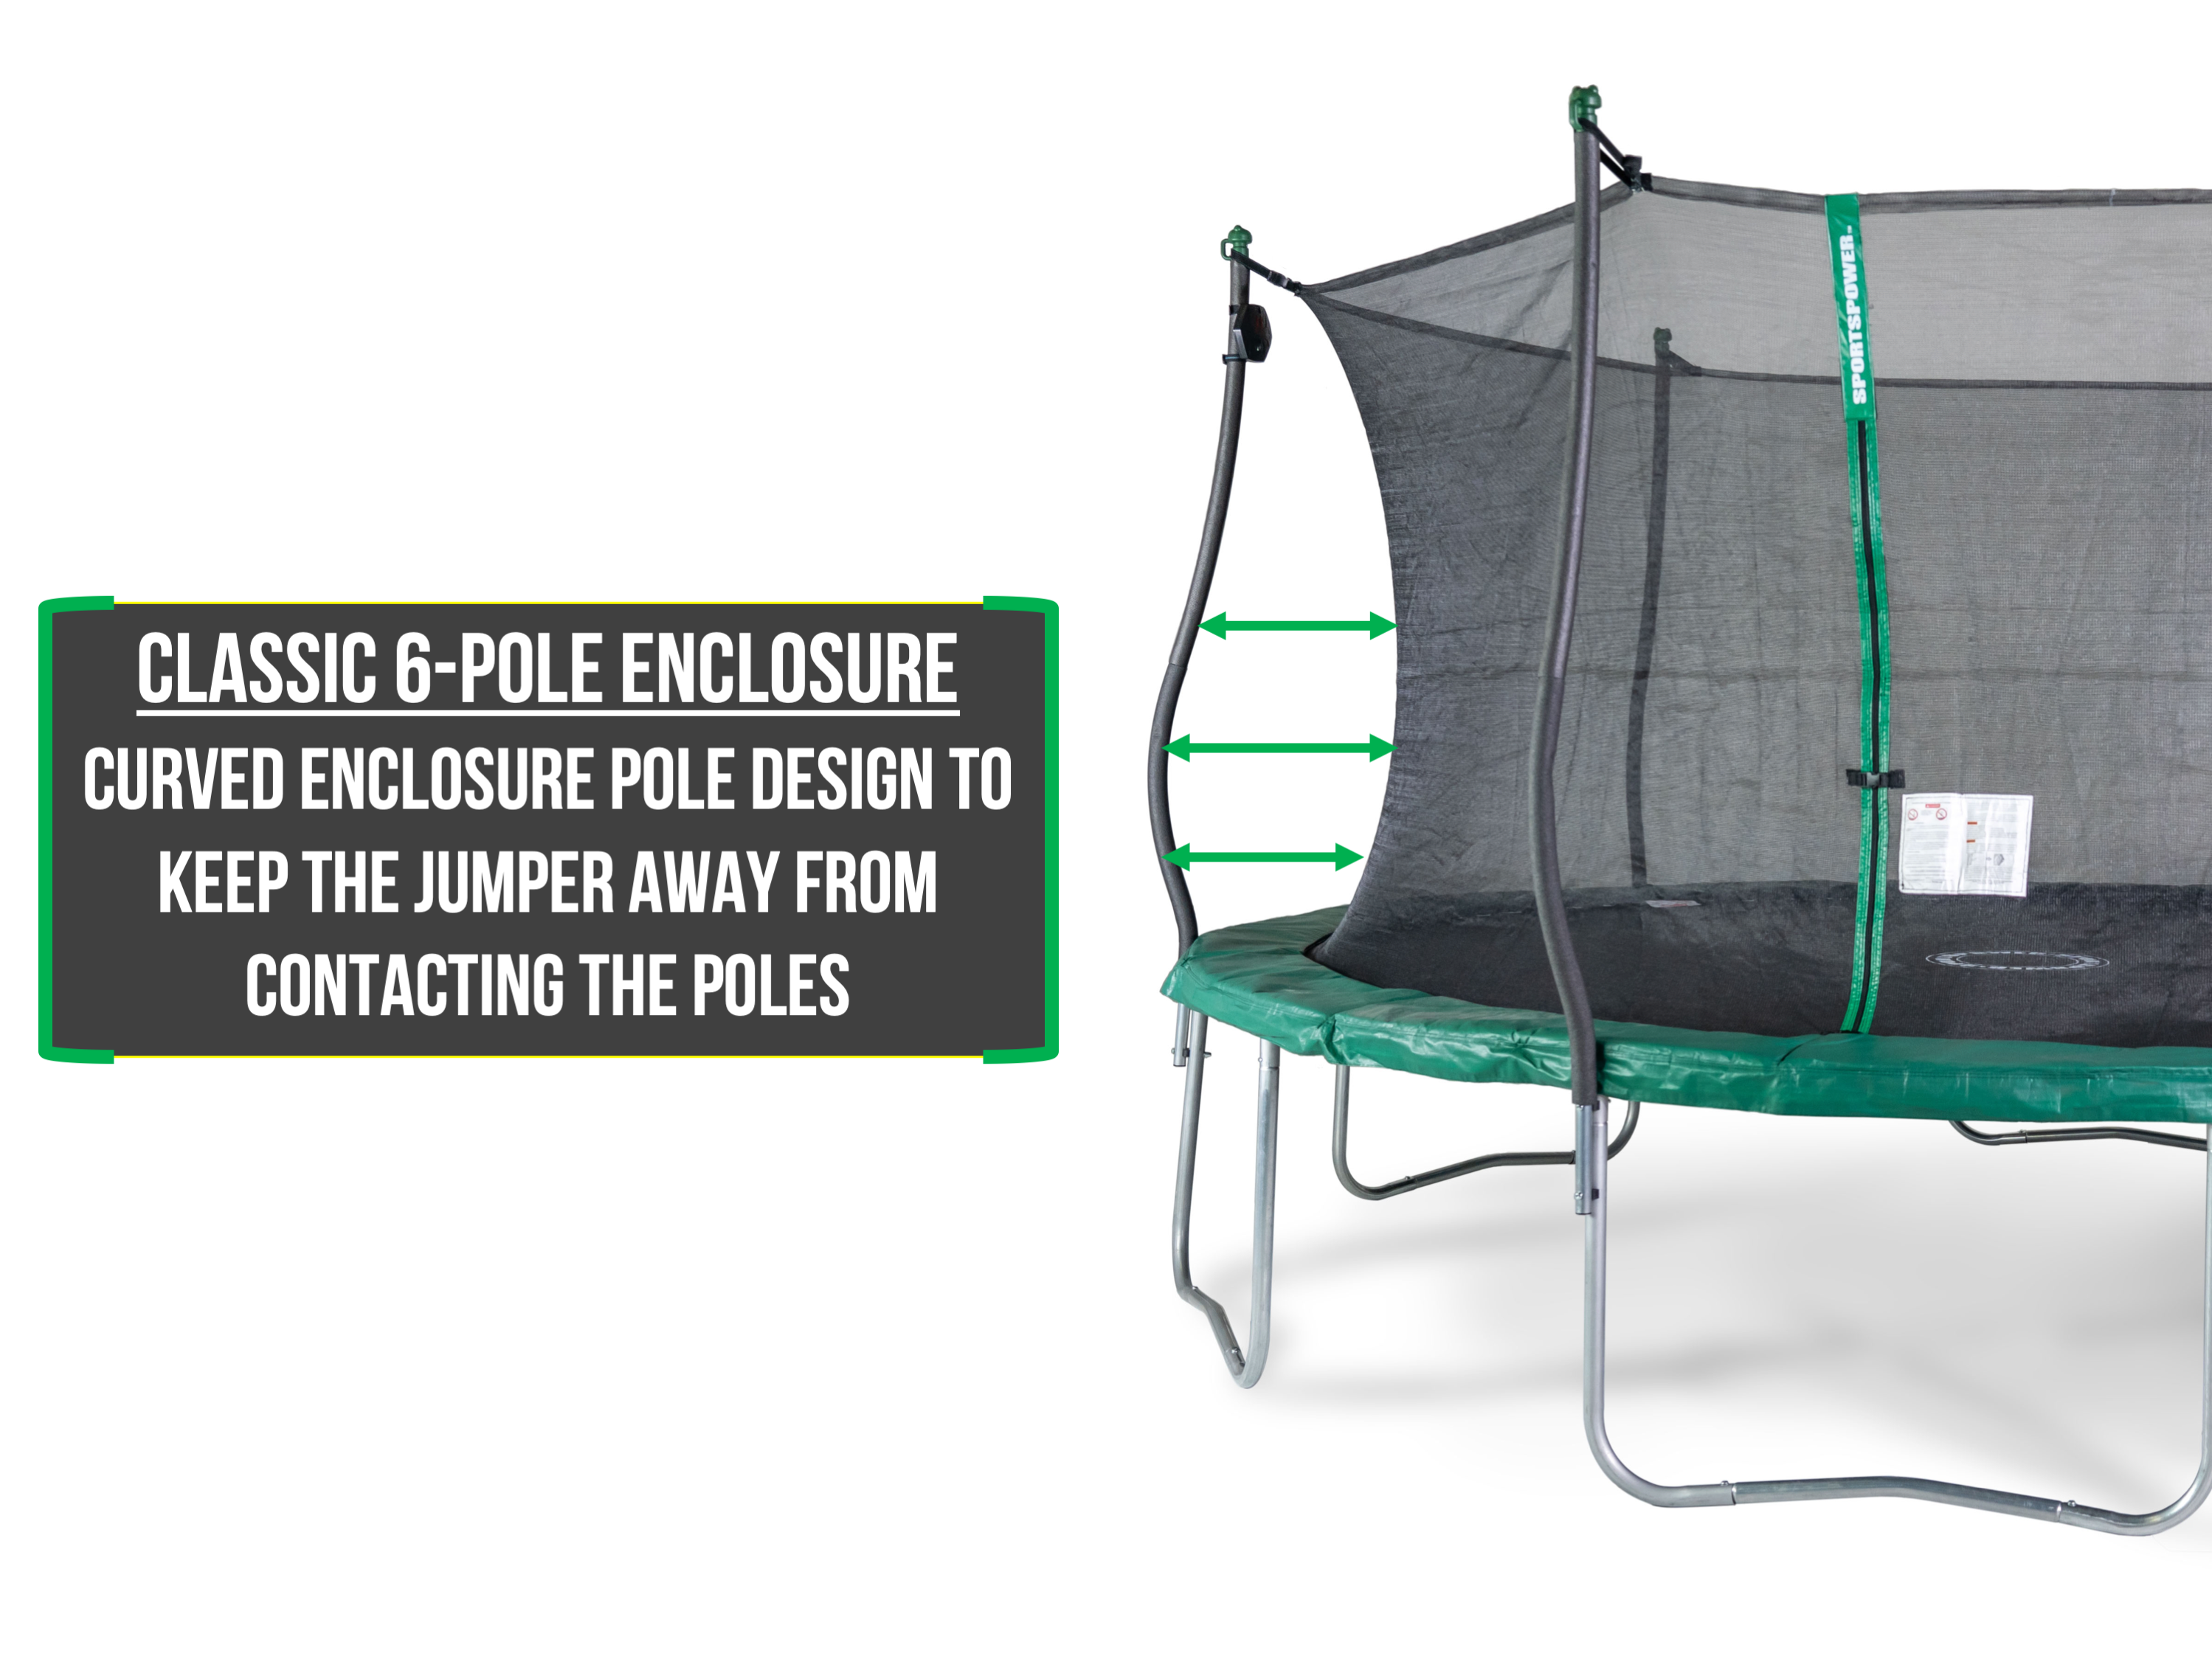 Bounce Pro 15' Trampoline, Electron Shooter Game, Basic Safety Enclosure, Green - image 3 of 7